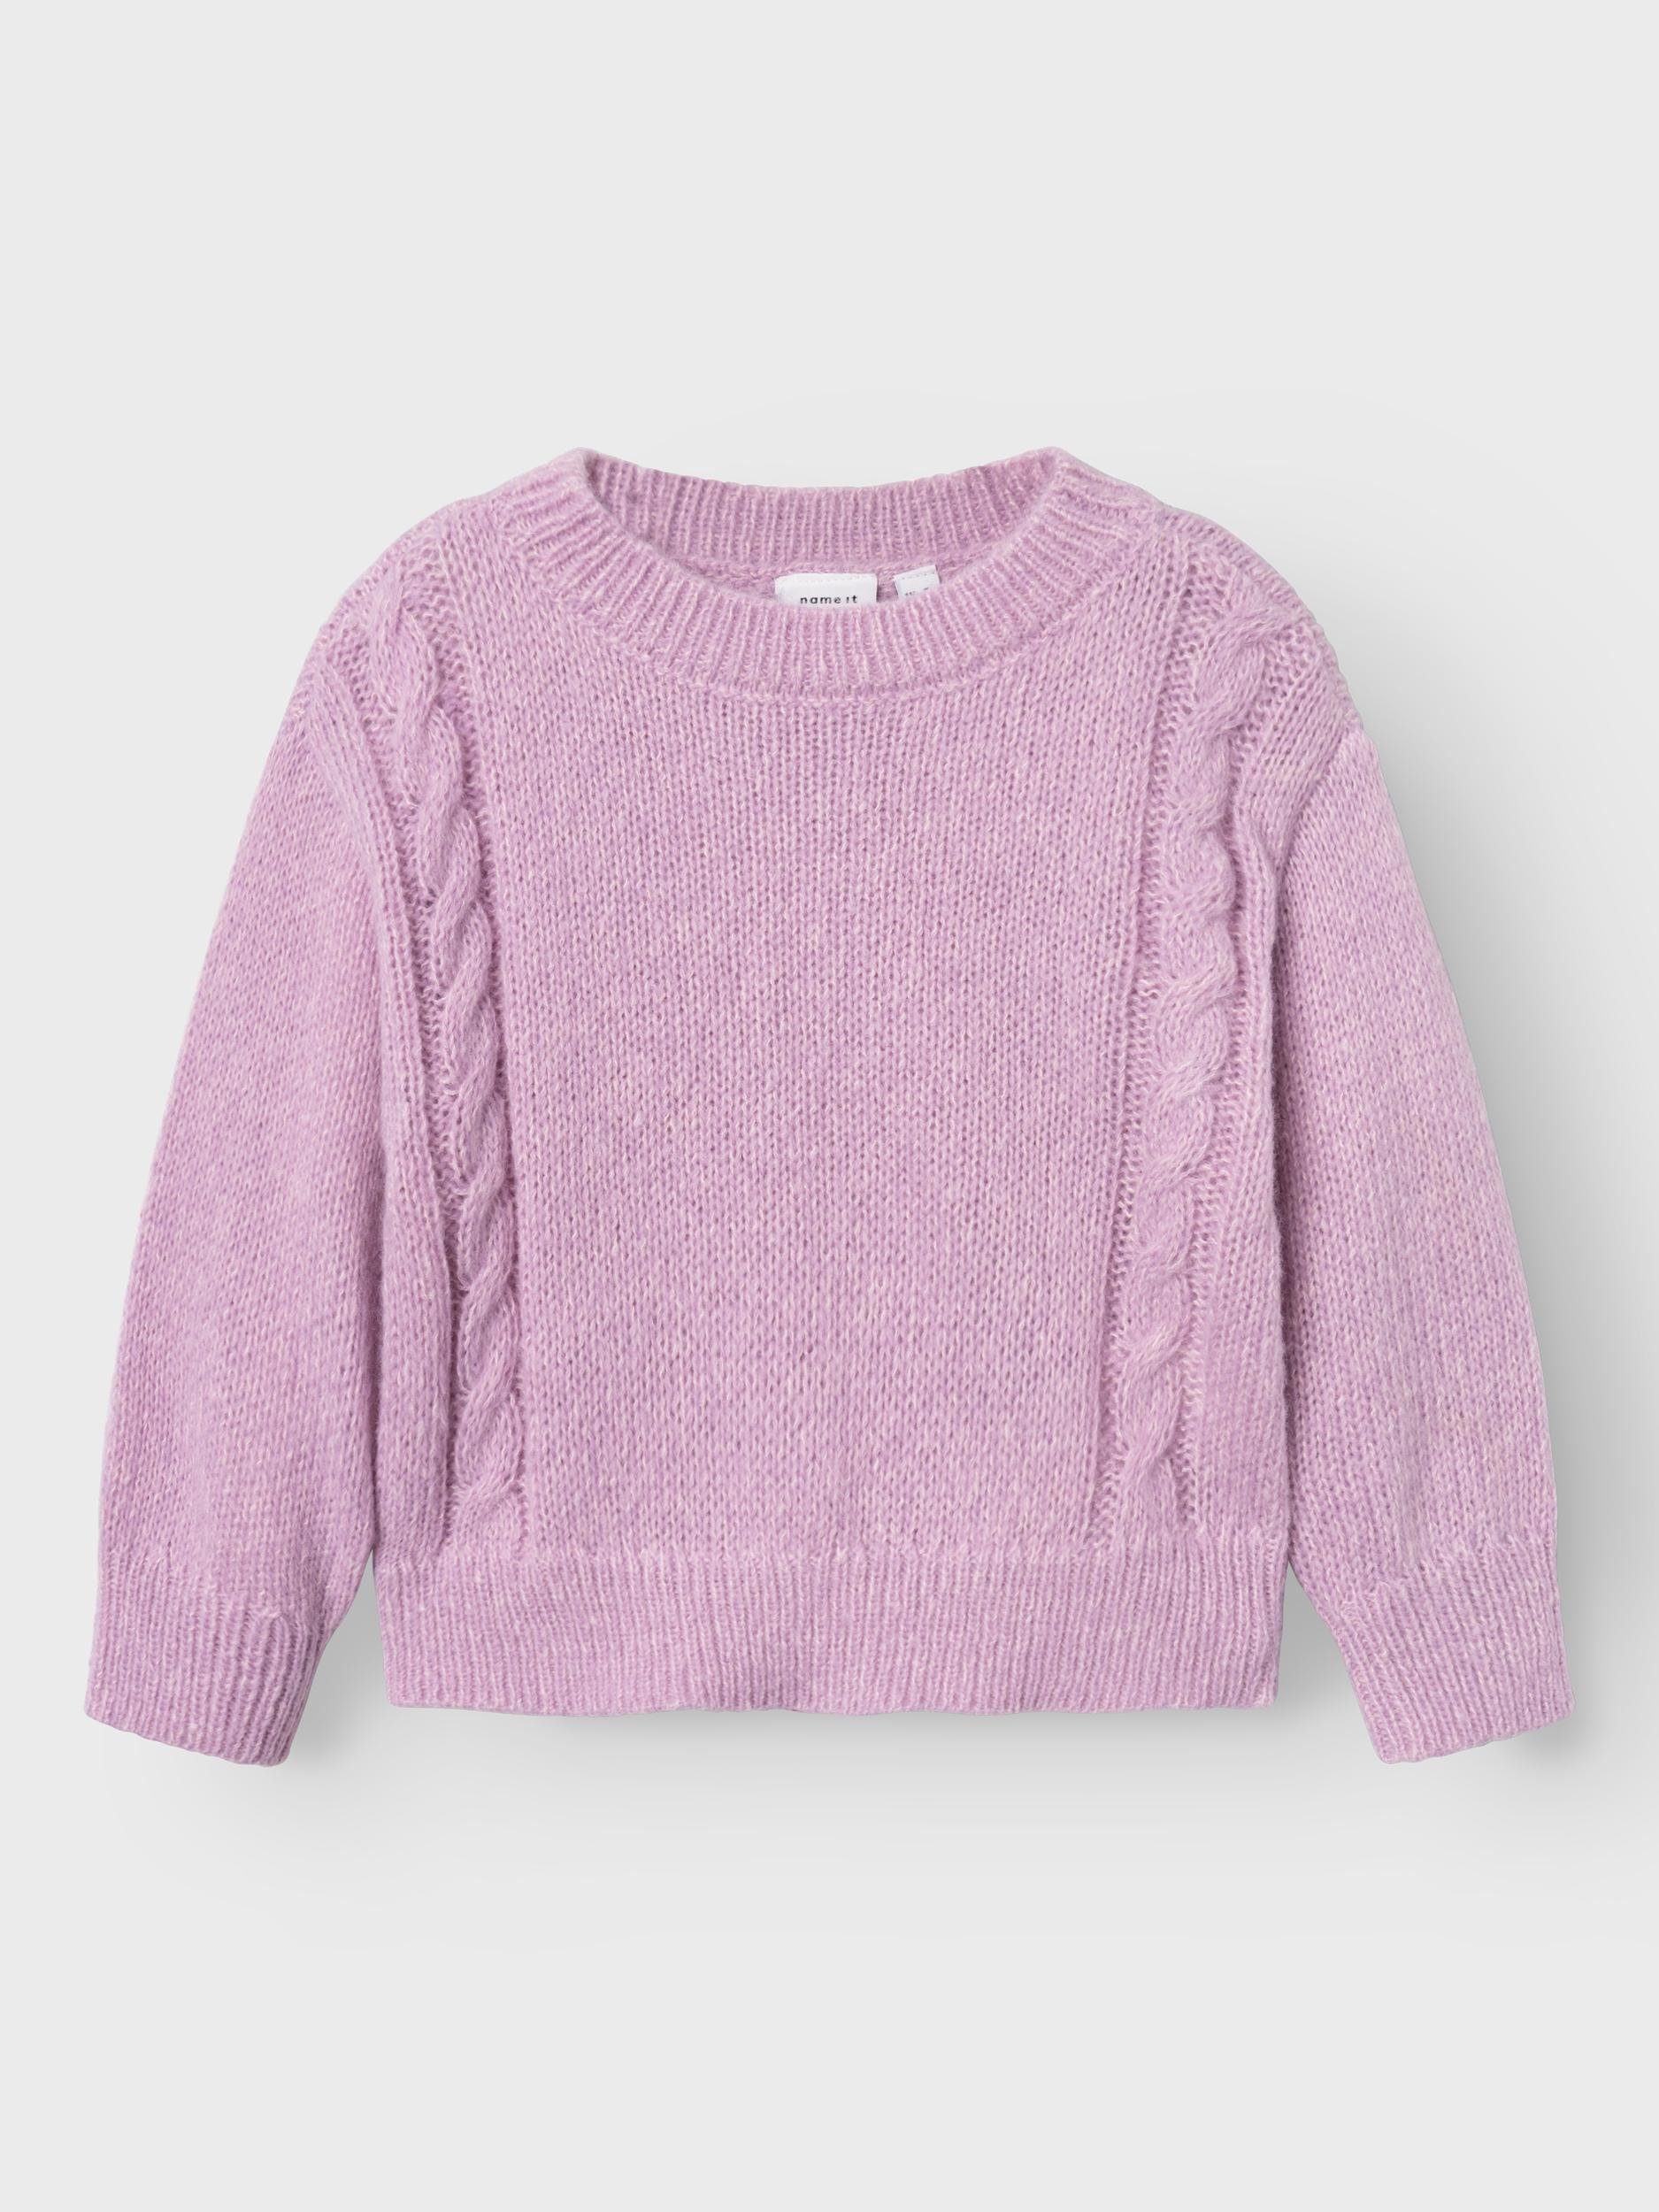 NMFOTHEA Name Strickpullover LS KNIT It